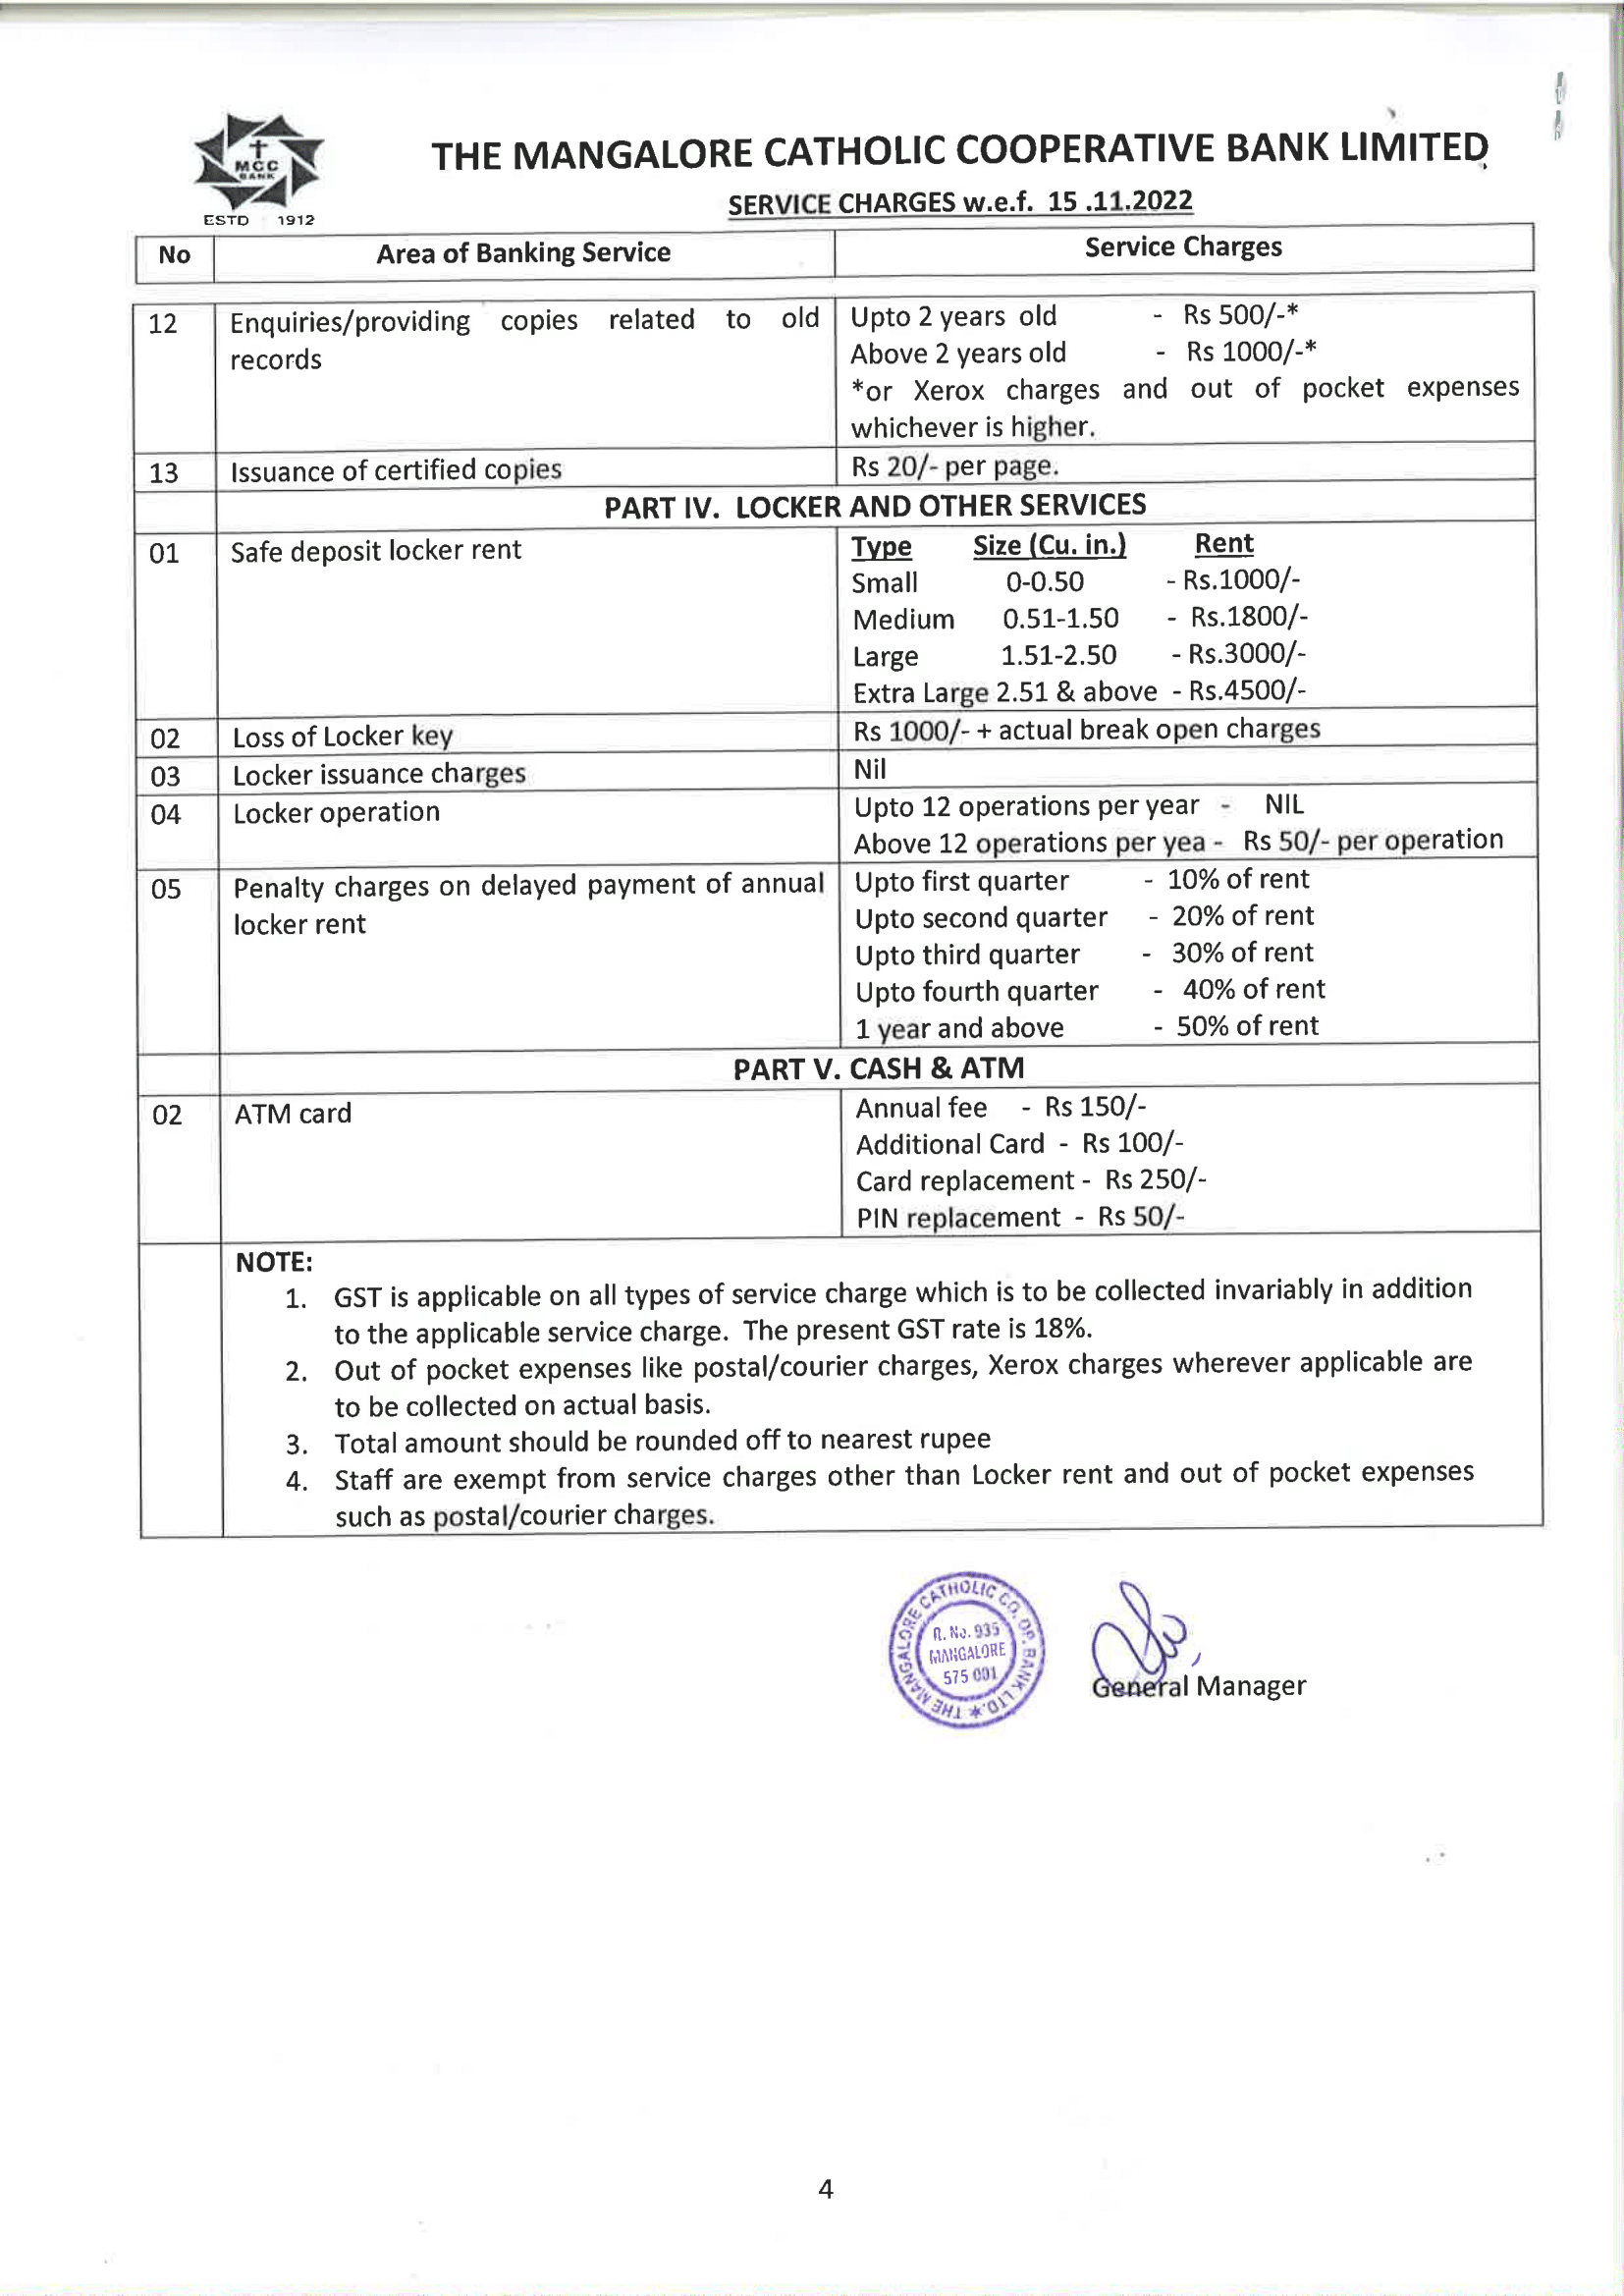 Revised_office_order_service_charges (1)-4.png